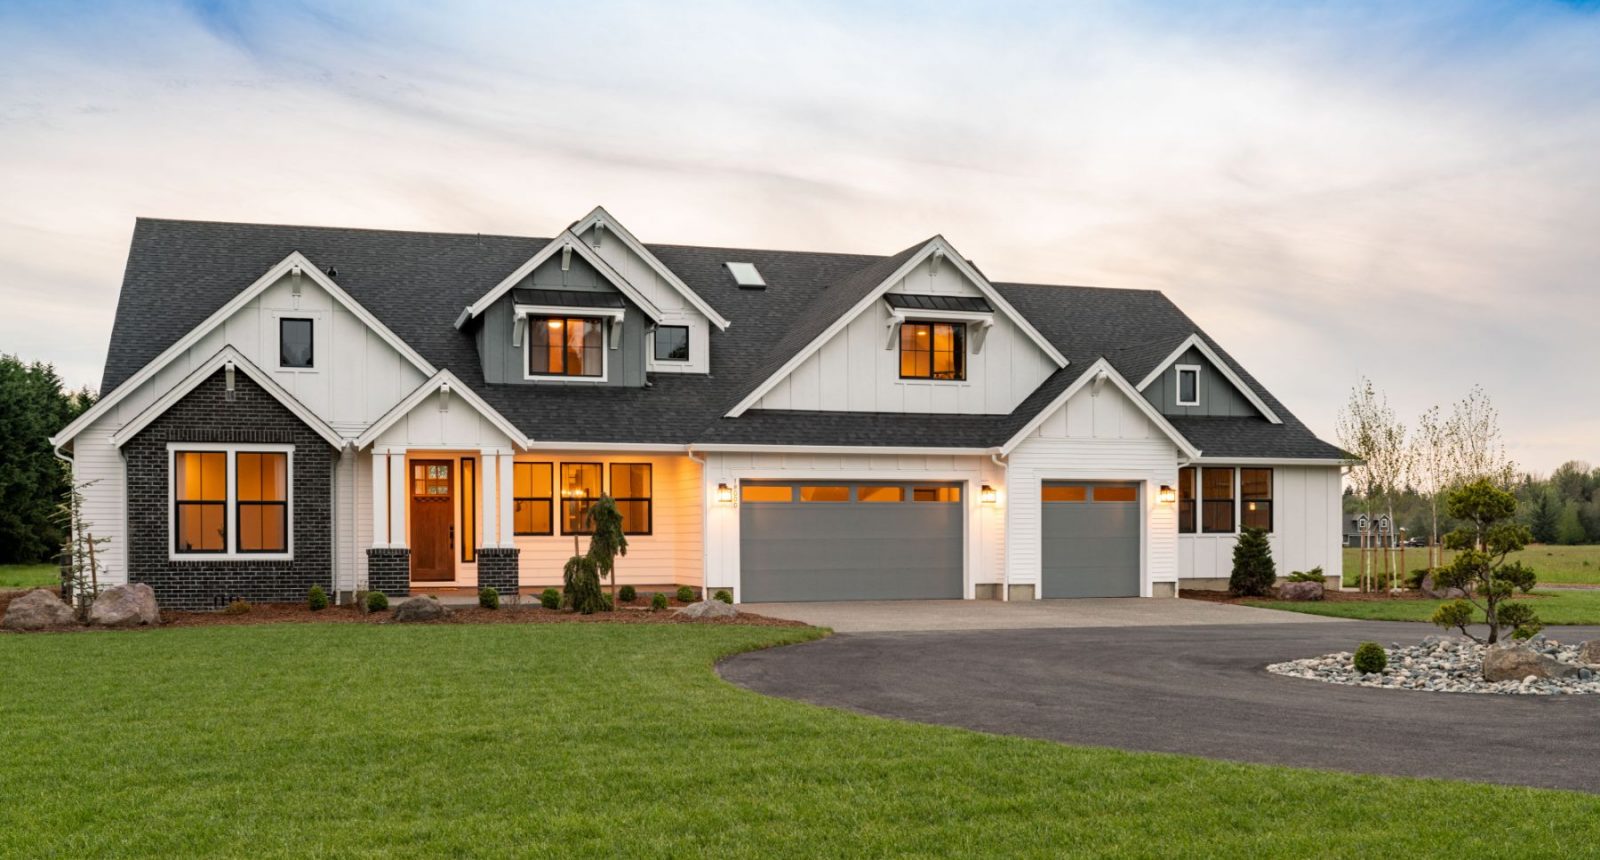 Why you should hire the best professional house builder?